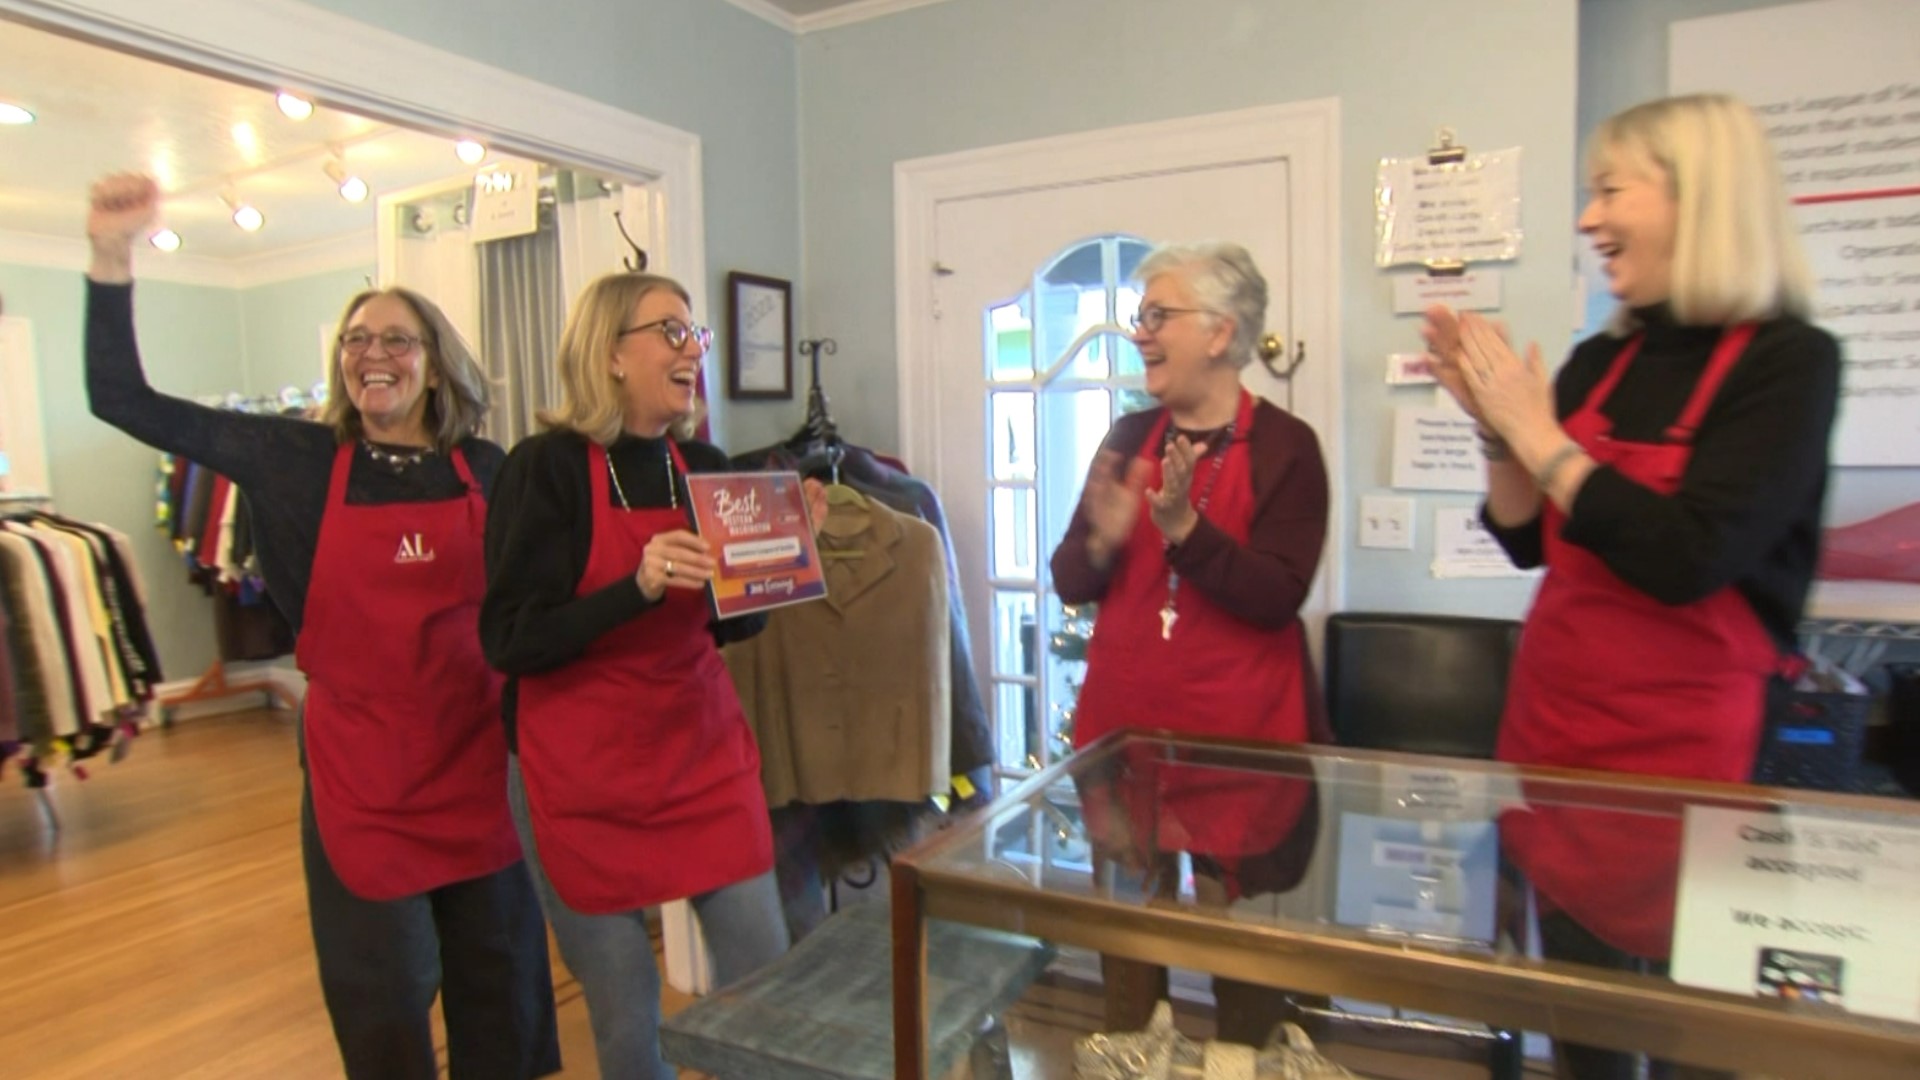 This Wallingford neighborhood thrift shop is your choice for high-quality items at low prices. #k5evening